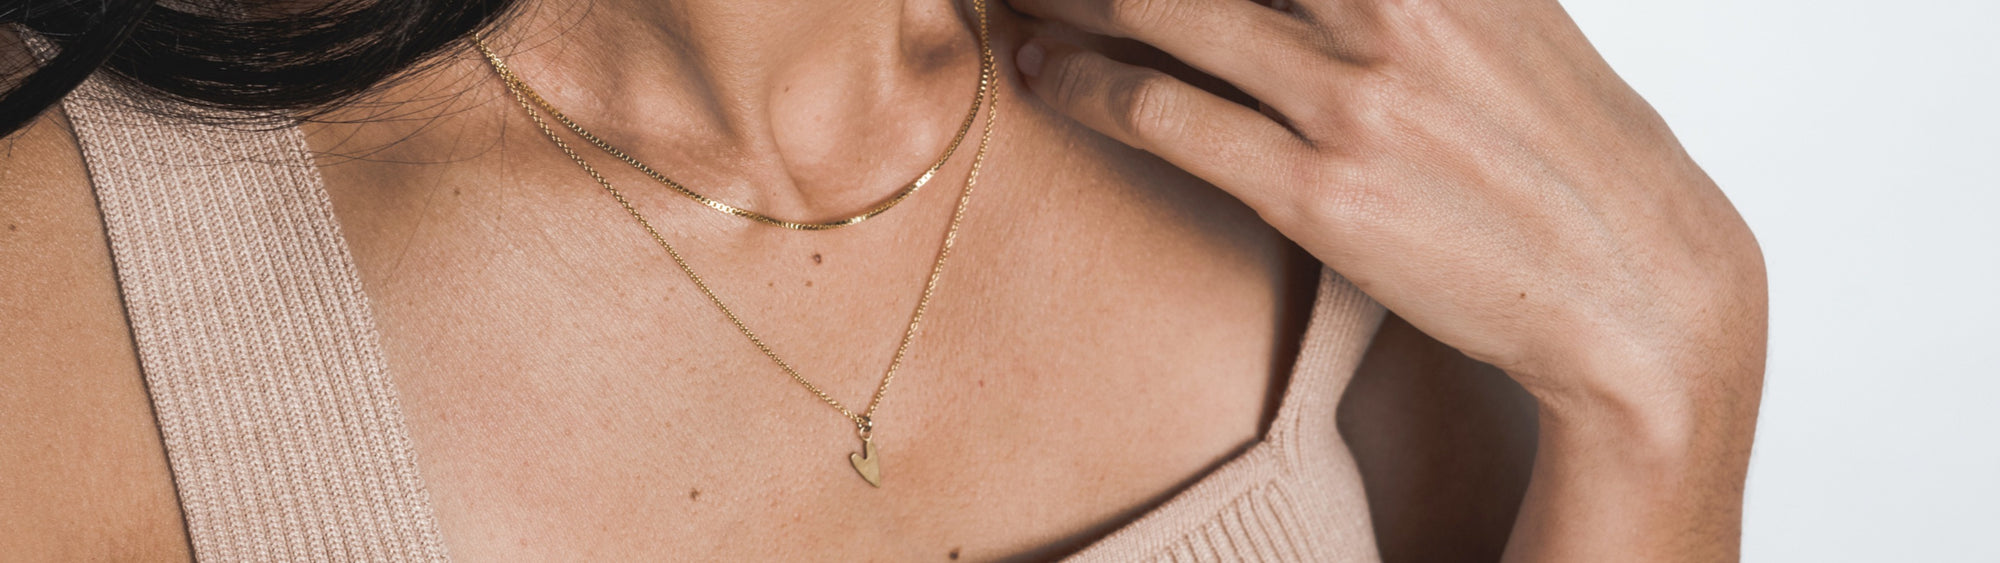 Close-up of a woman wearing a beige top and a delicate gold necklace with a pendant, touching her neck gently.